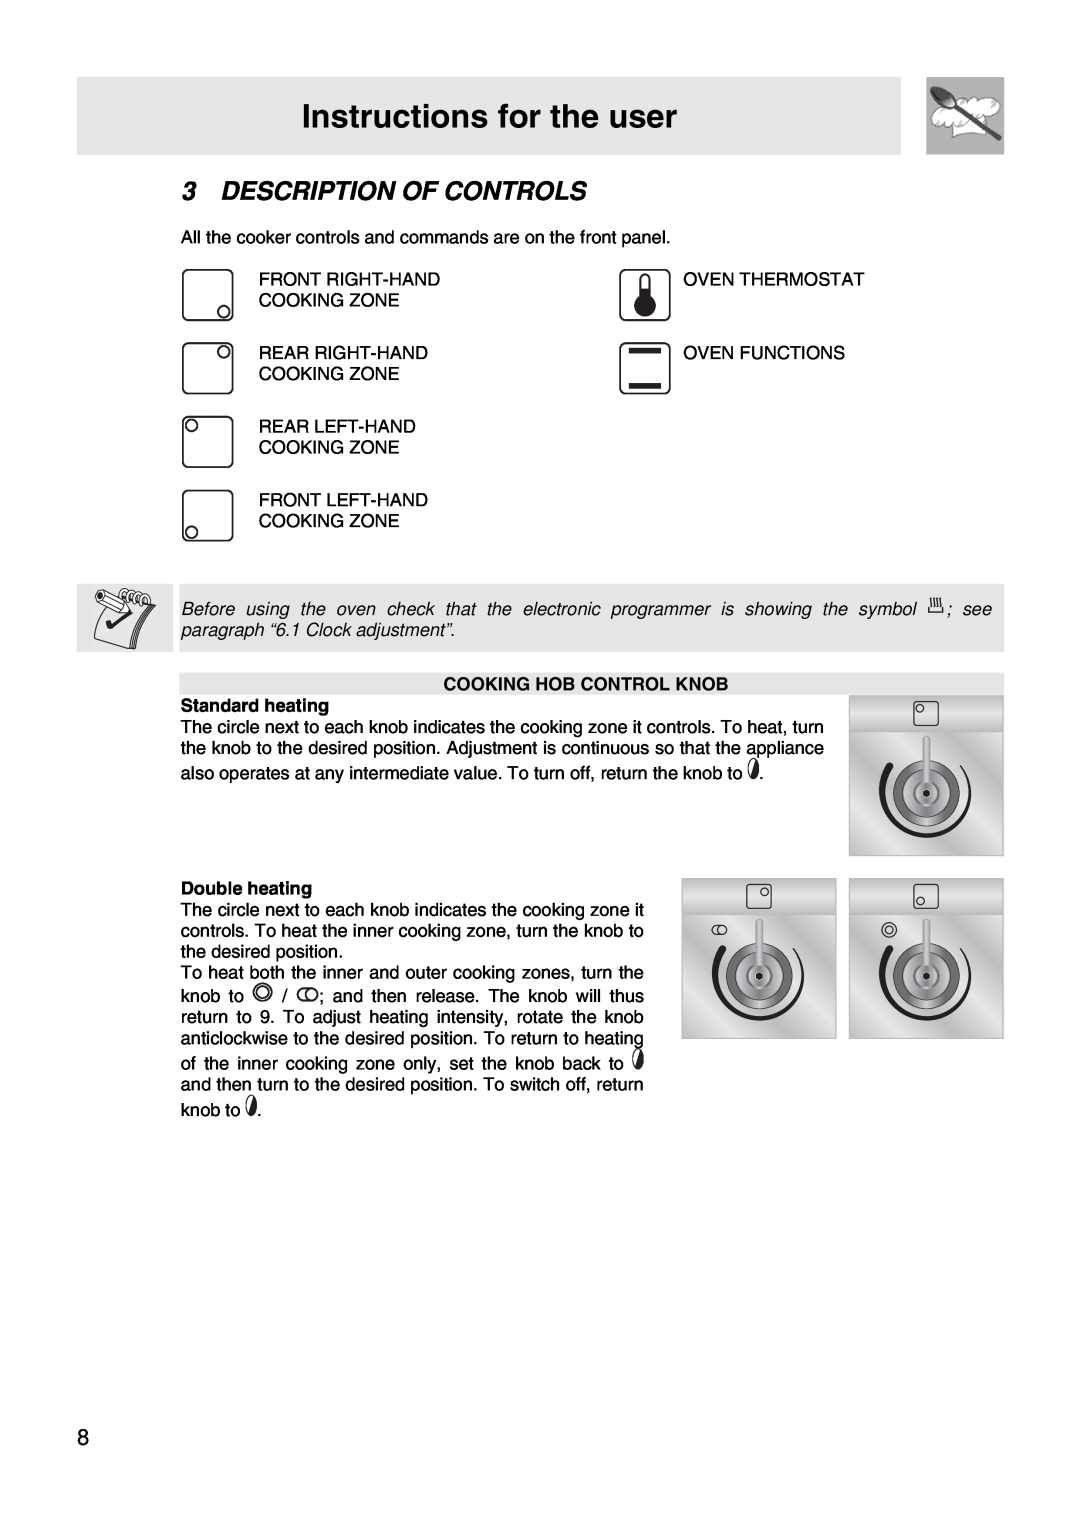 Smeg FS67MFX Instructions for the user, Description Of Controls, COOKING HOB CONTROL KNOB Standard heating, Double heating 